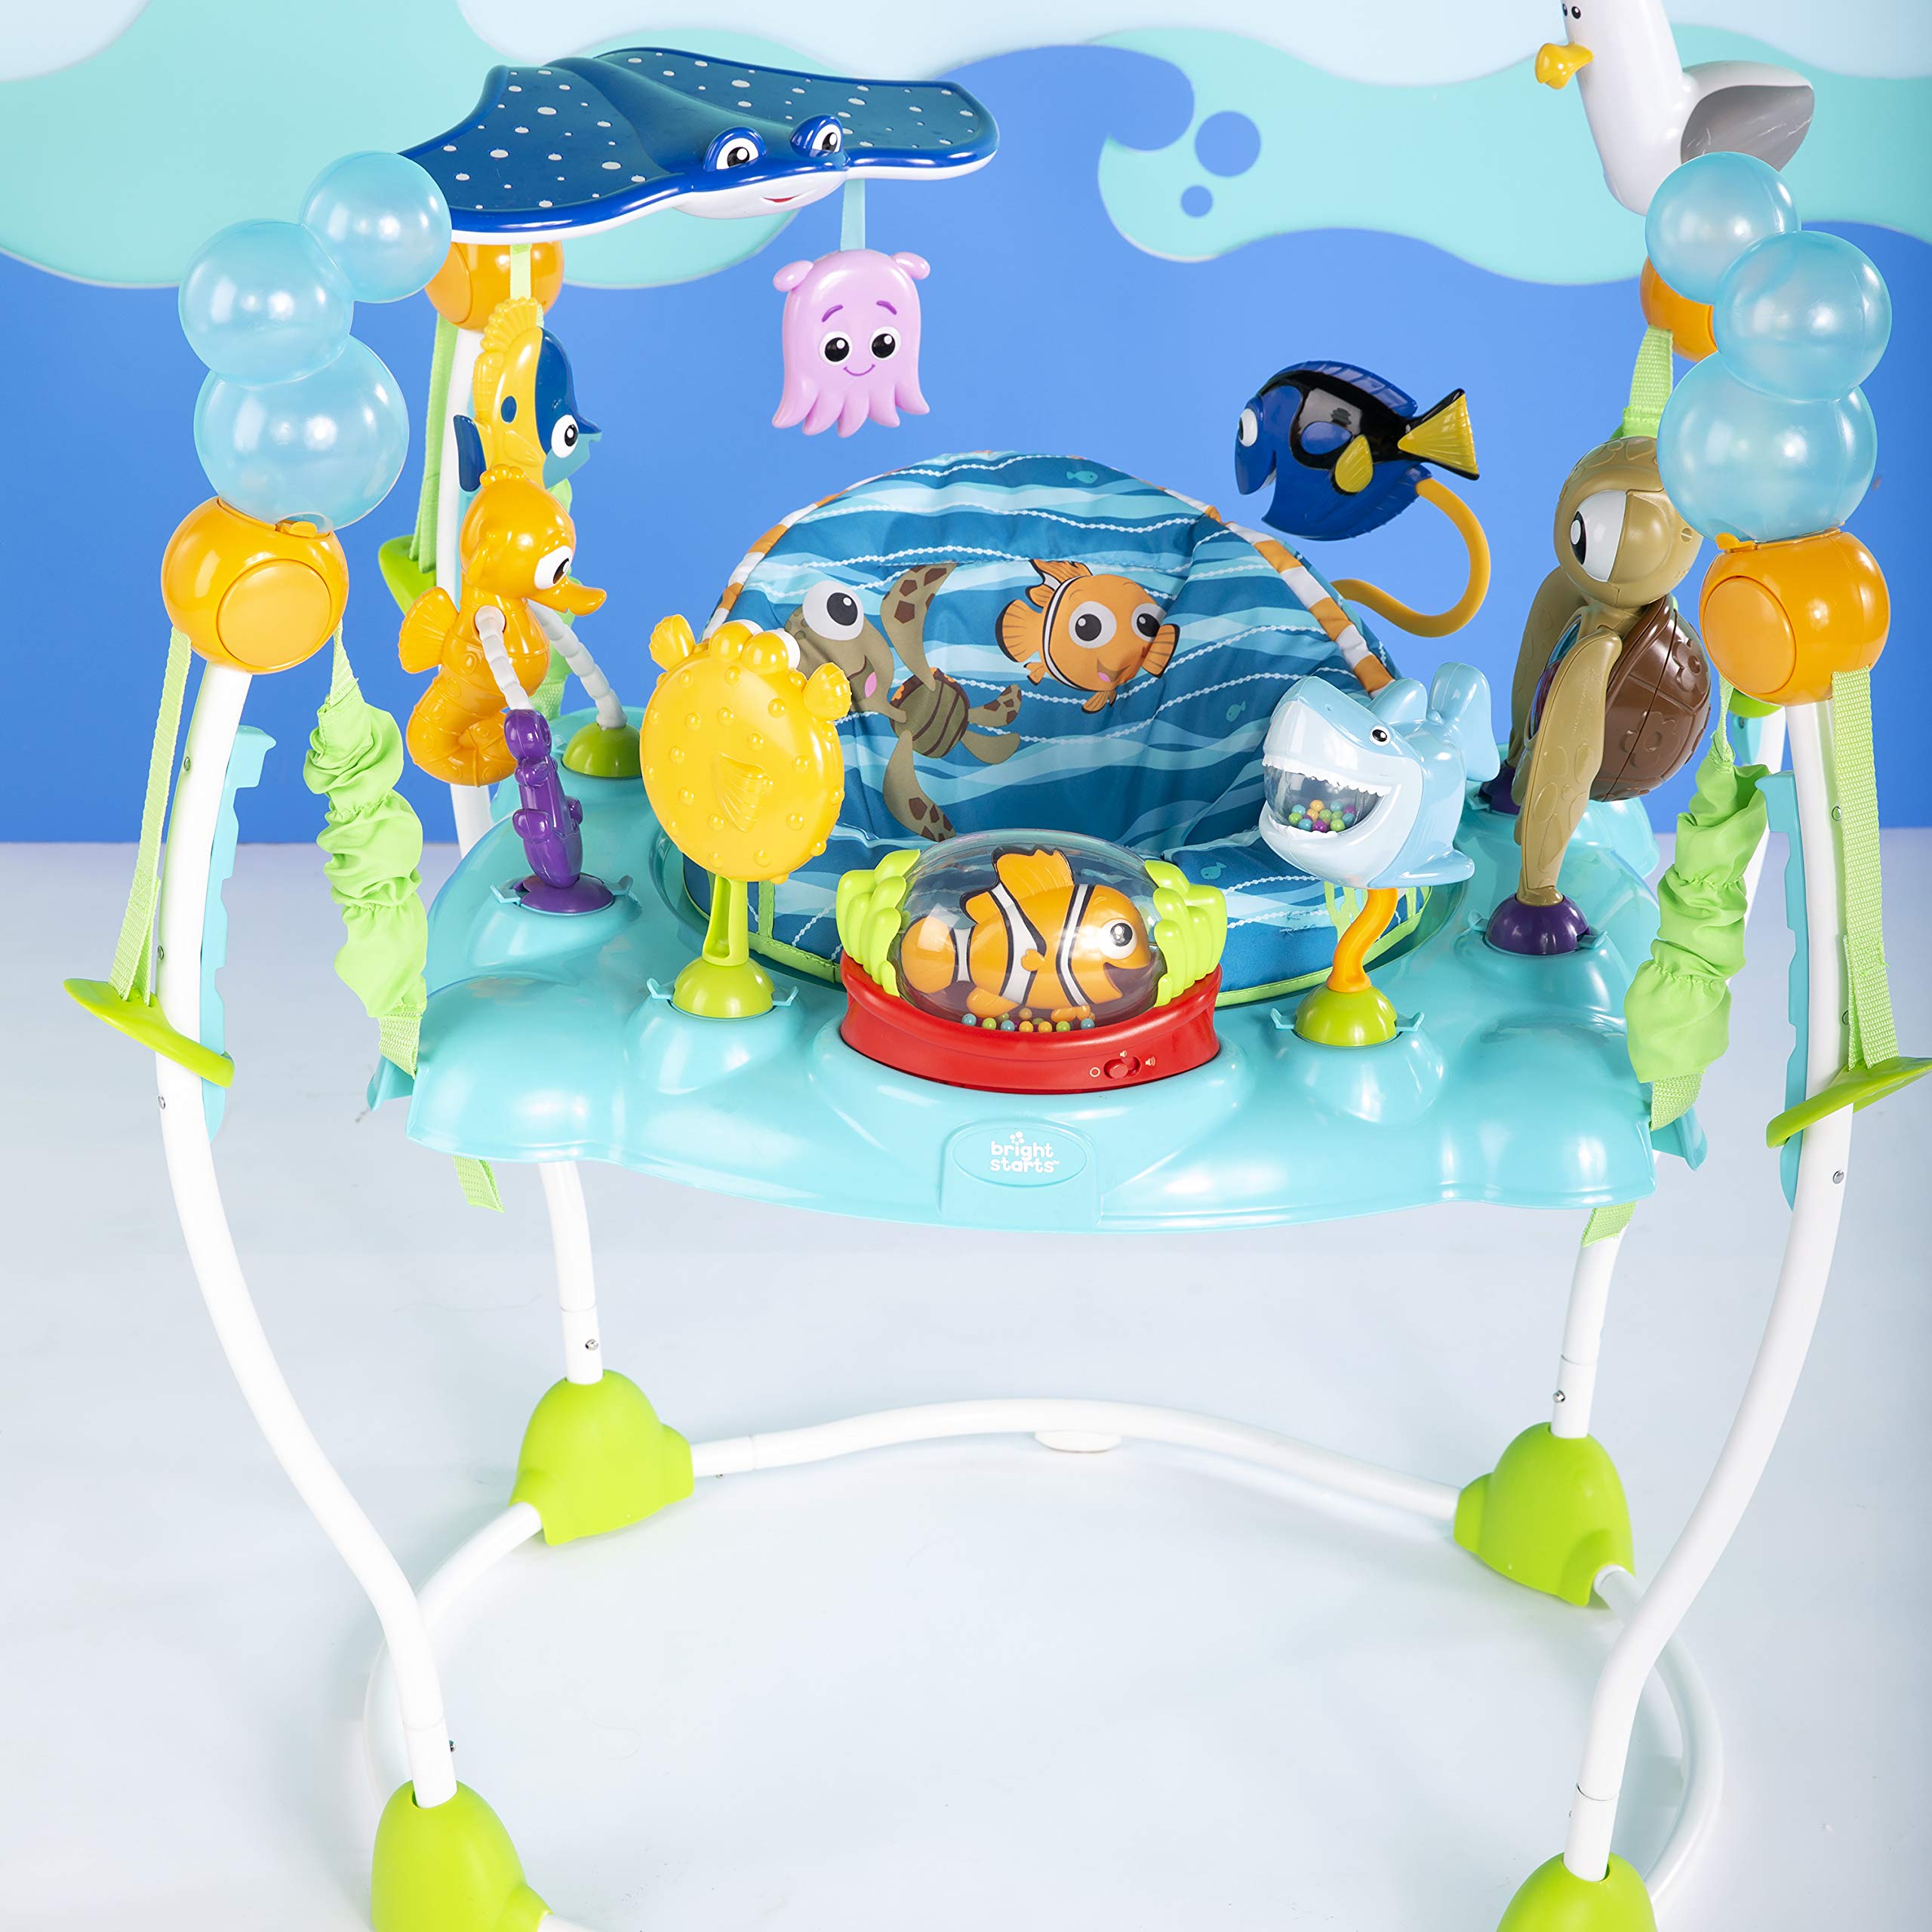 Disney Baby Finding Nemo Sea of Activities Baby Activity Center Jumper with Interactive Toys, Lights, Songs & Sounds, 6-12 Months (Blue)